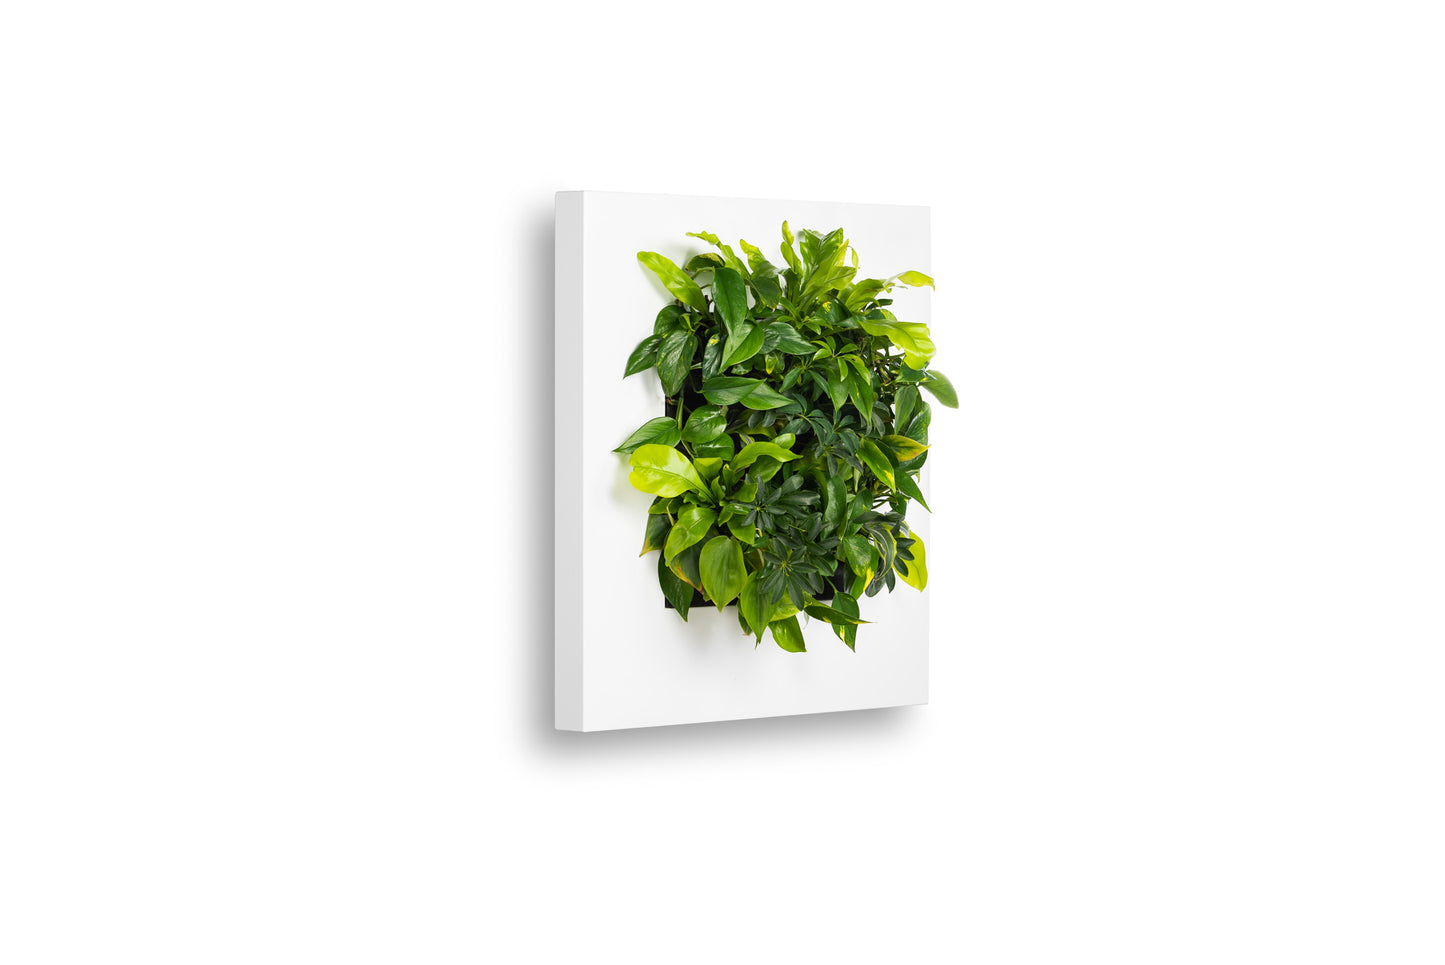 Wall Planter Frames for Live Plants